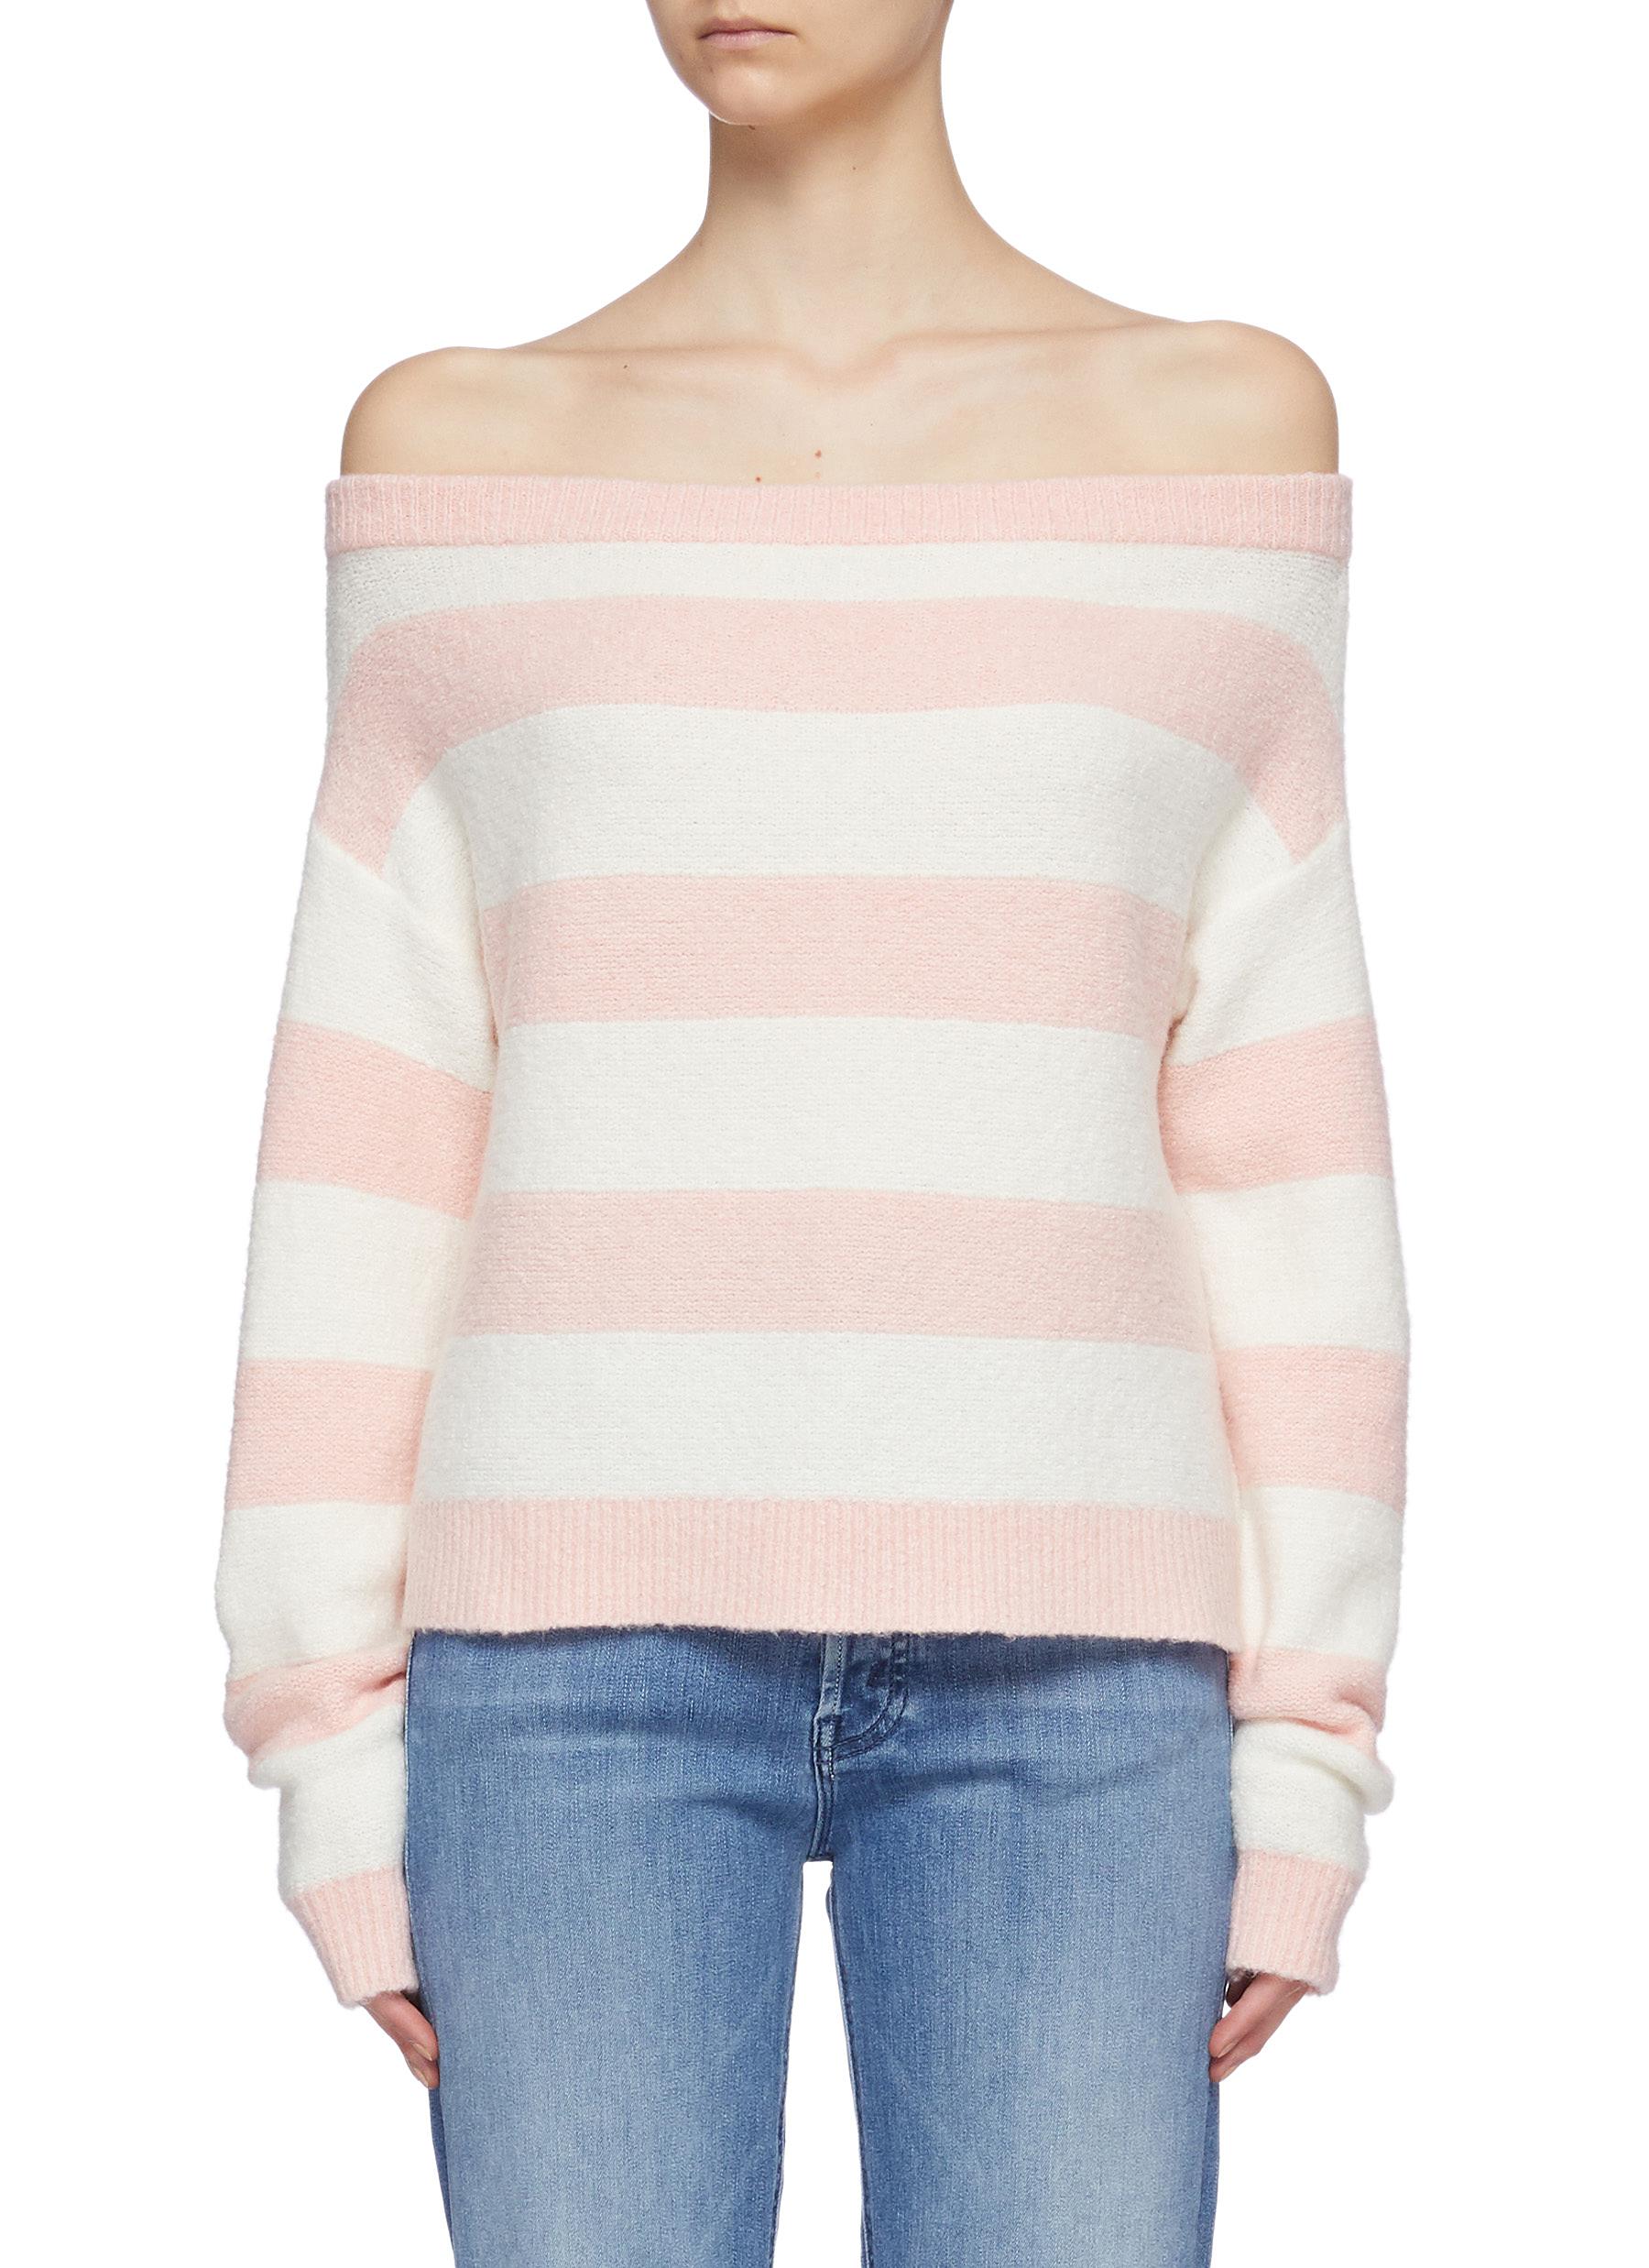 ALICE AND OLIVIA 'BAUER' OFF-SHOULDER STRIPED OPEN KNIT TOP